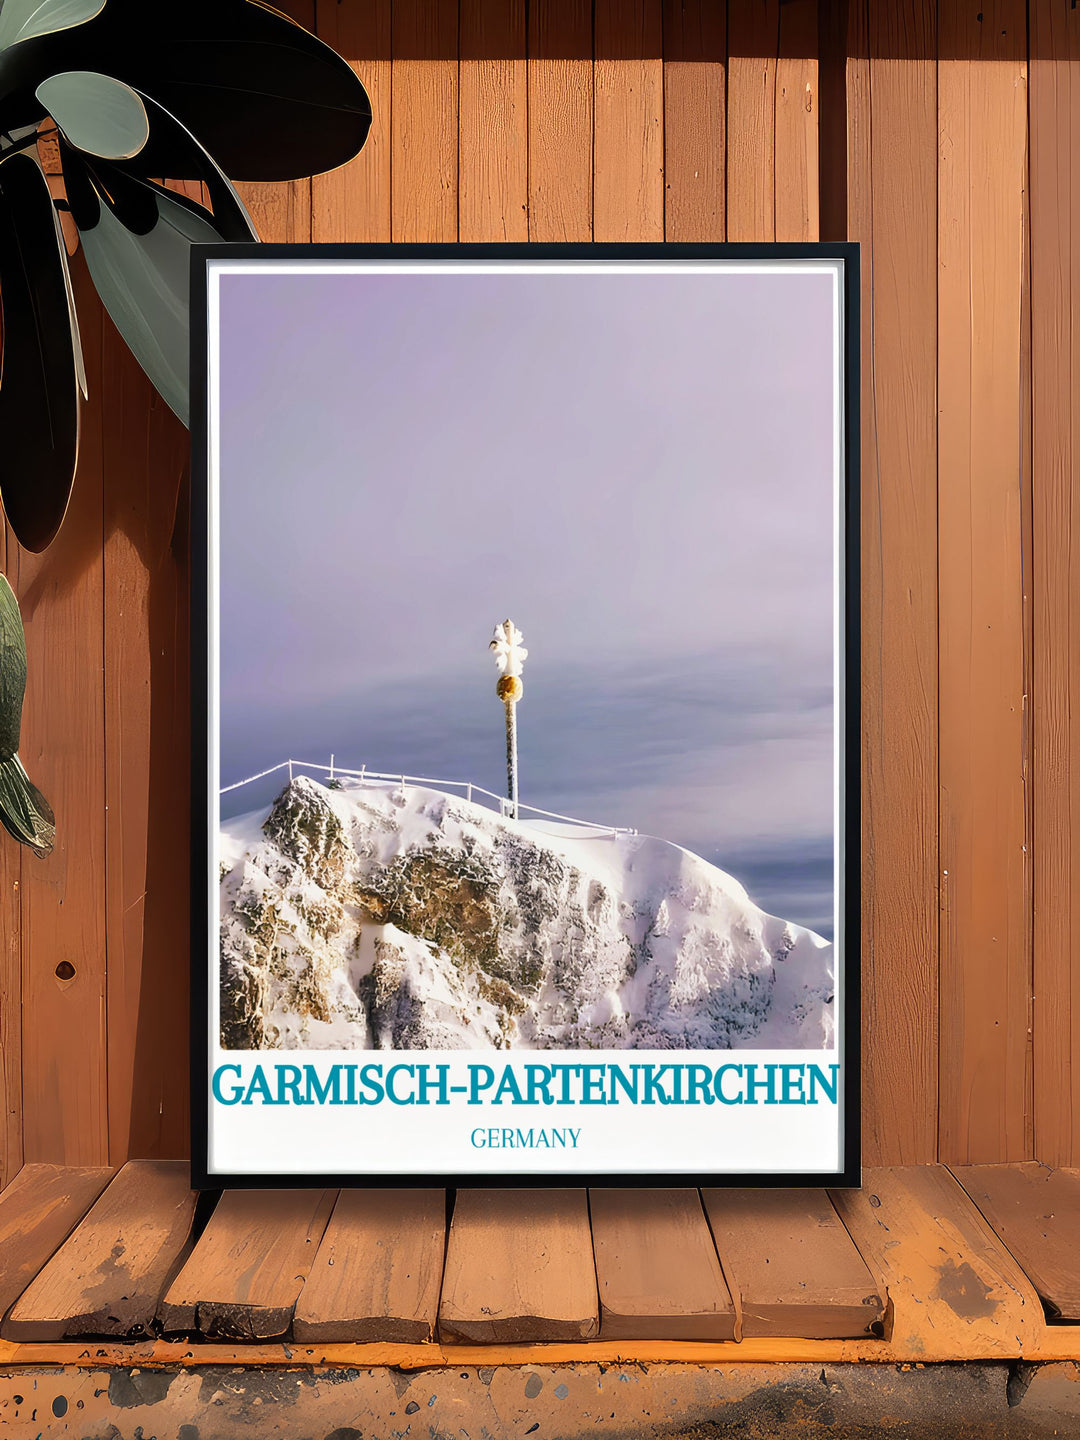 Framed art capturing the natural beauty of Zugspitze, with its towering snowy peaks and breathtaking alpine views, reflecting the majestic and serene landscapes of Germanys highest mountain near Garmisch Partenkirchen.